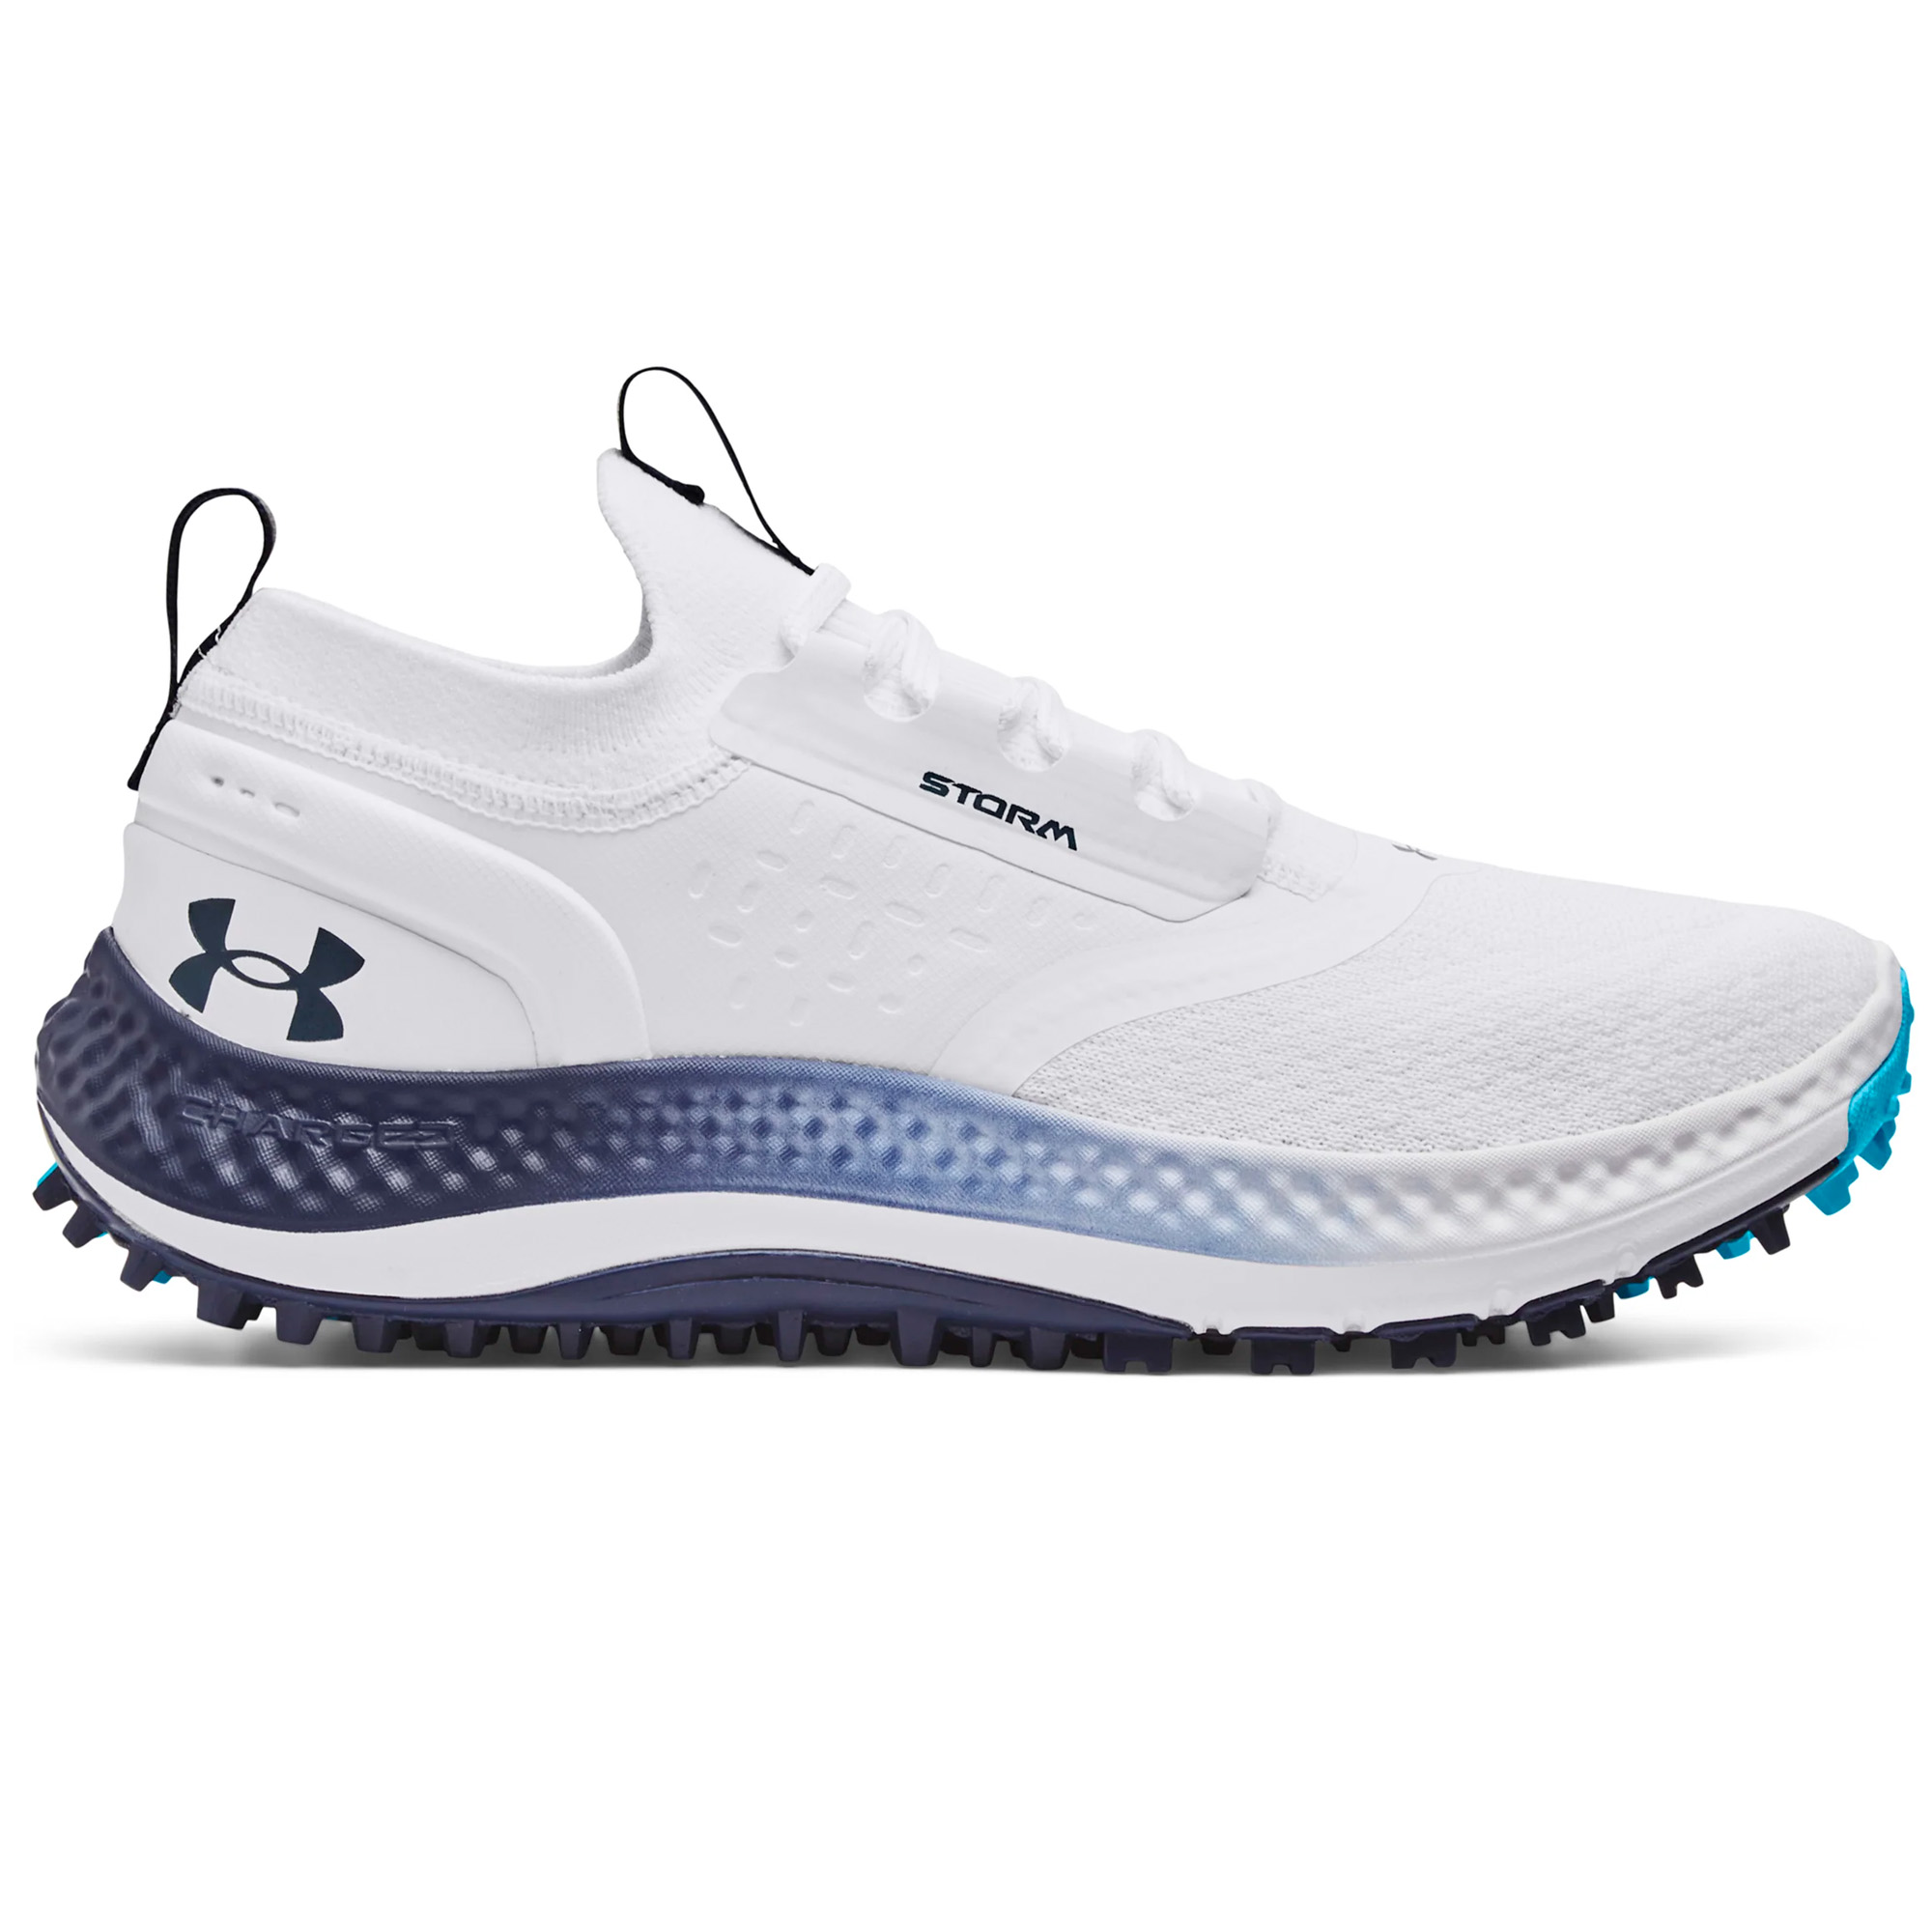 Under Armour Mens UA Charged Phantom SL Golf Shoes  - White/Midnight Navy